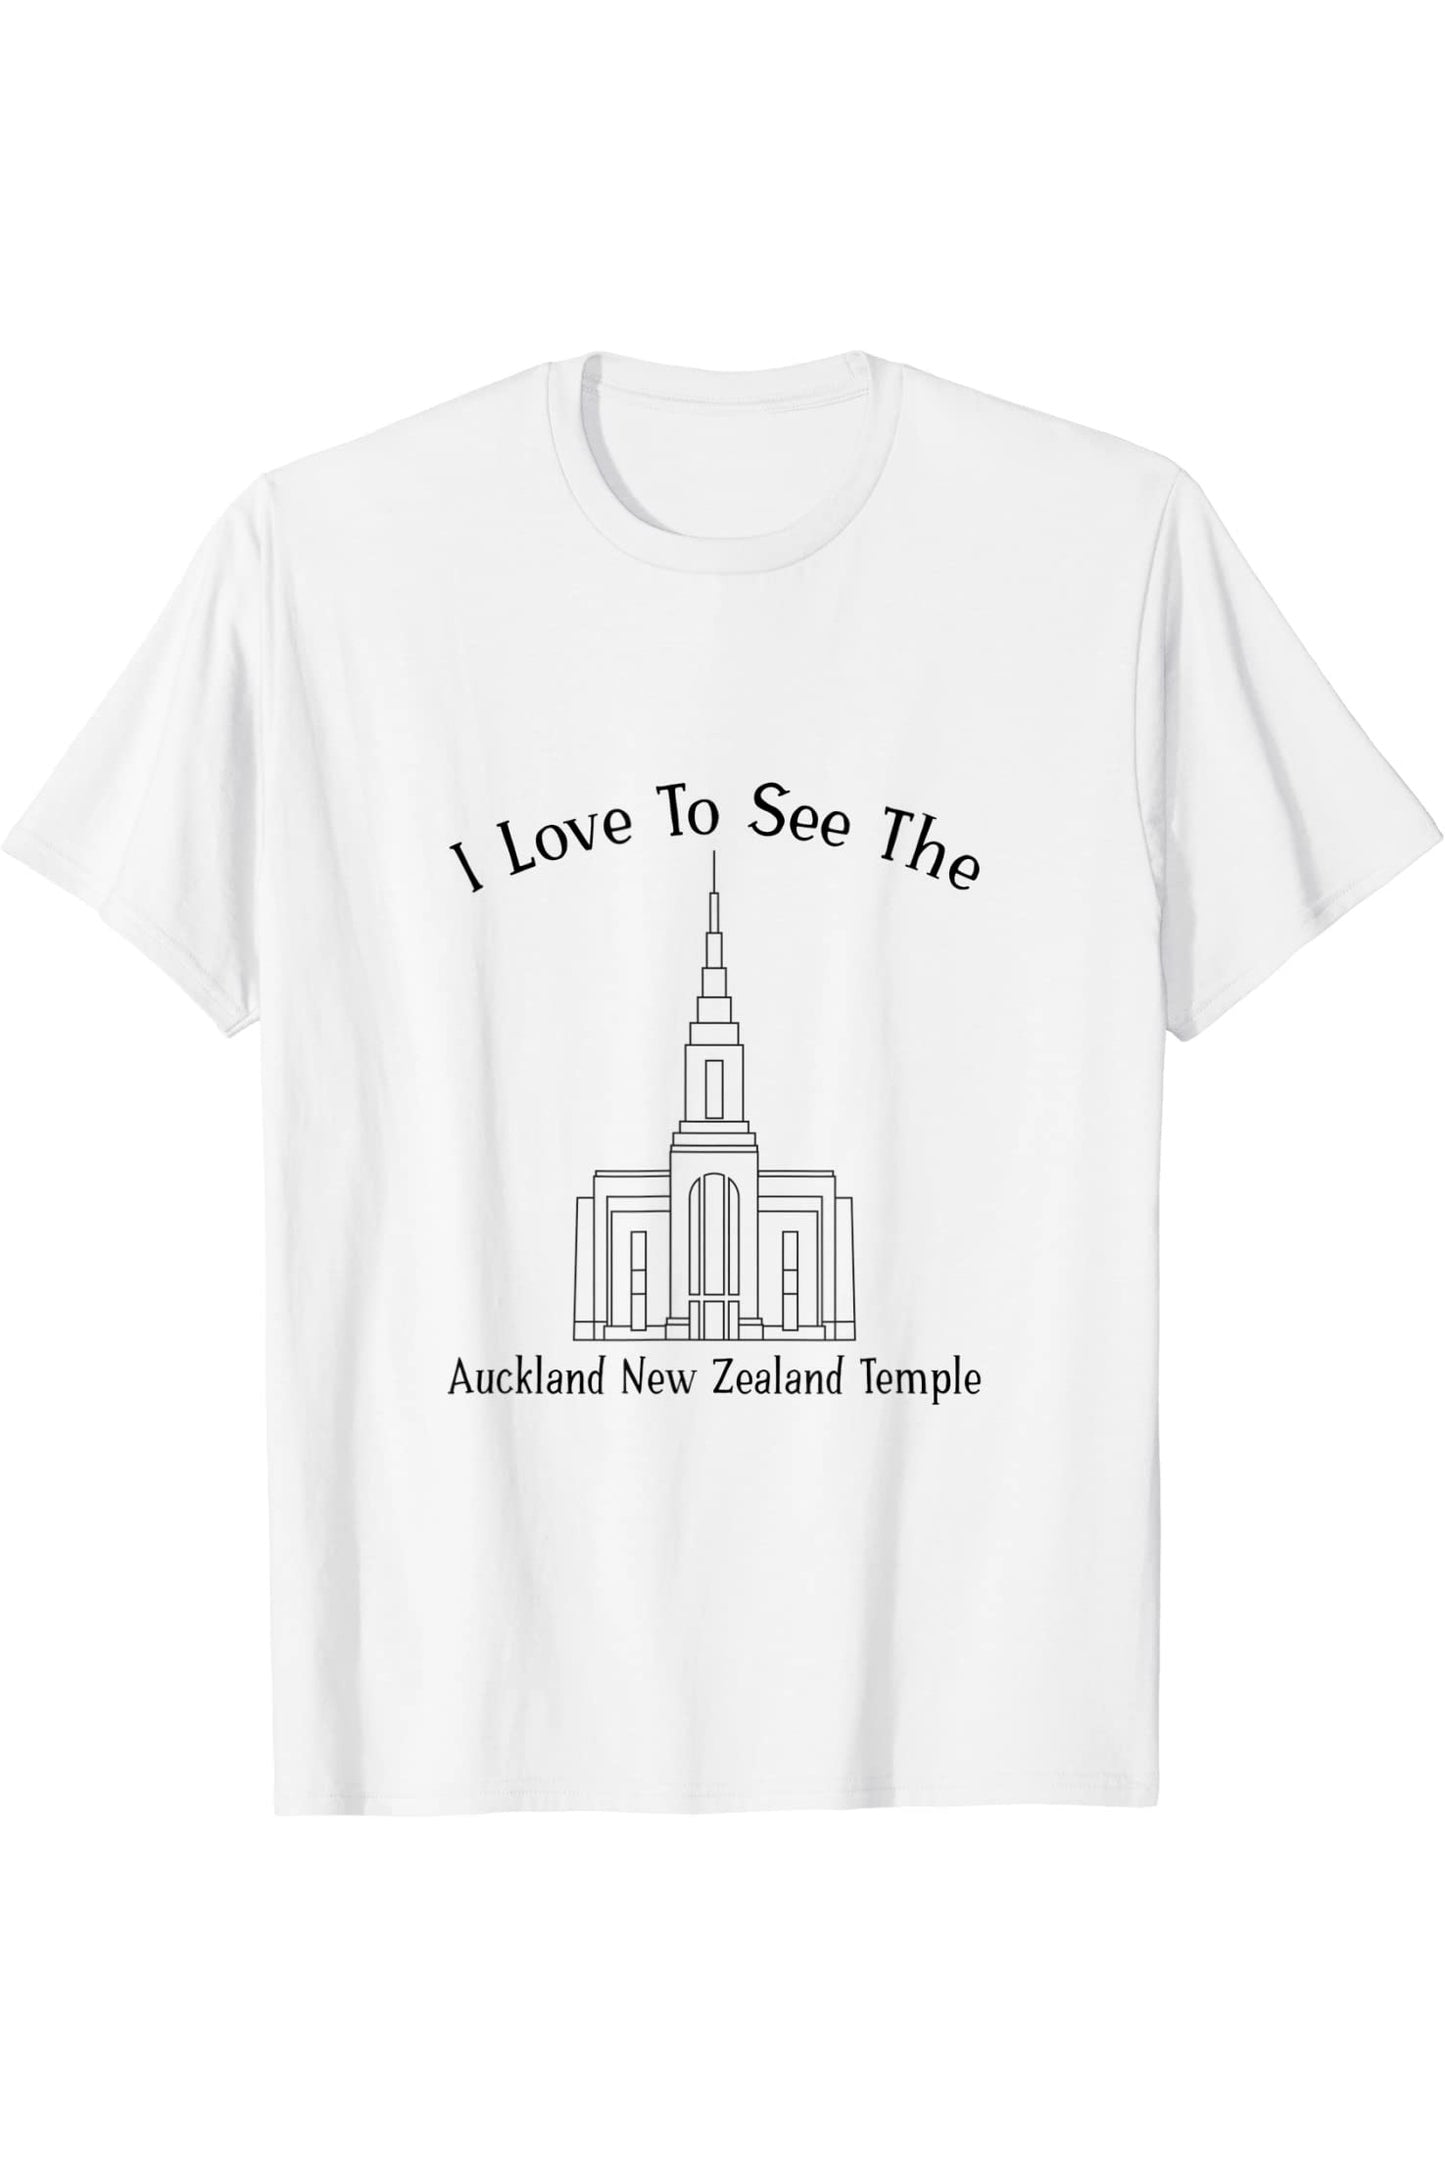 Auckland New Zealand Temple T-Shirt - Happy Style (English) US